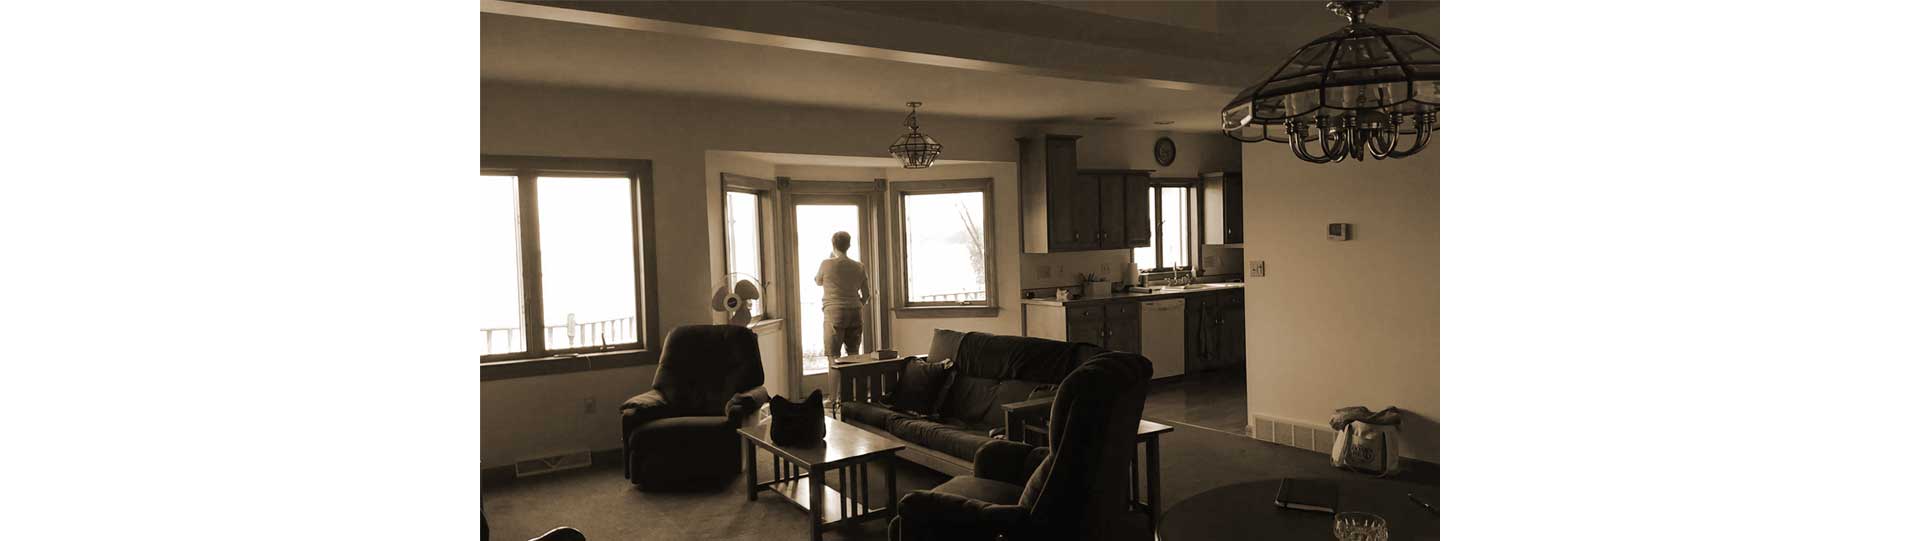 View from existing living room toward lake showing dated interior and the existing windows' limited lake views